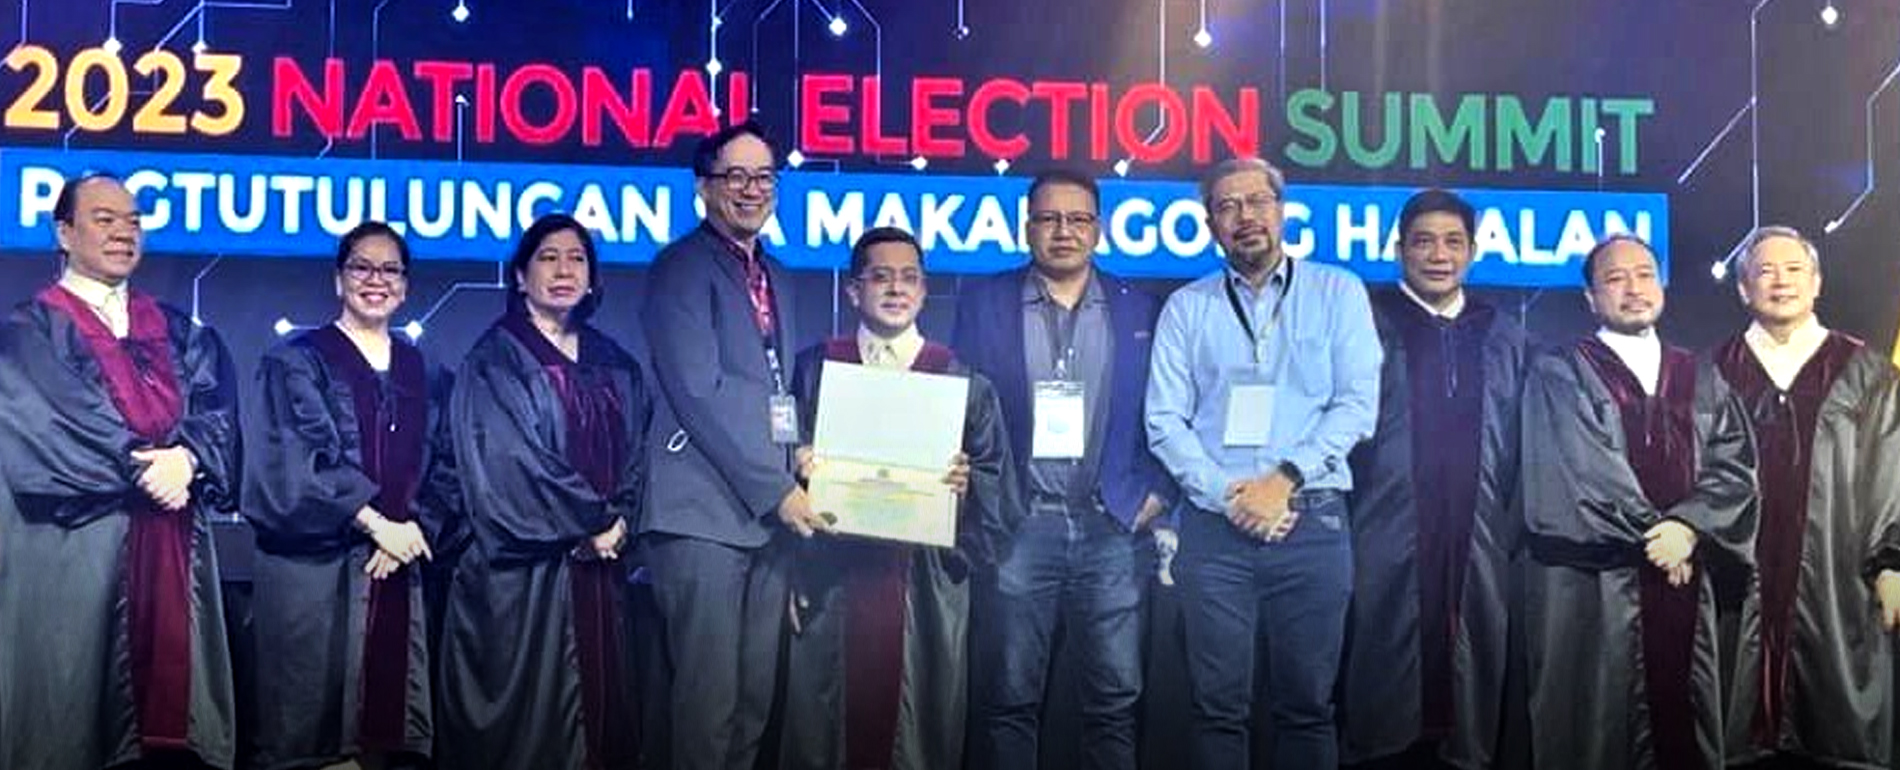 PLDT enables first-ever hybrid national poll summit